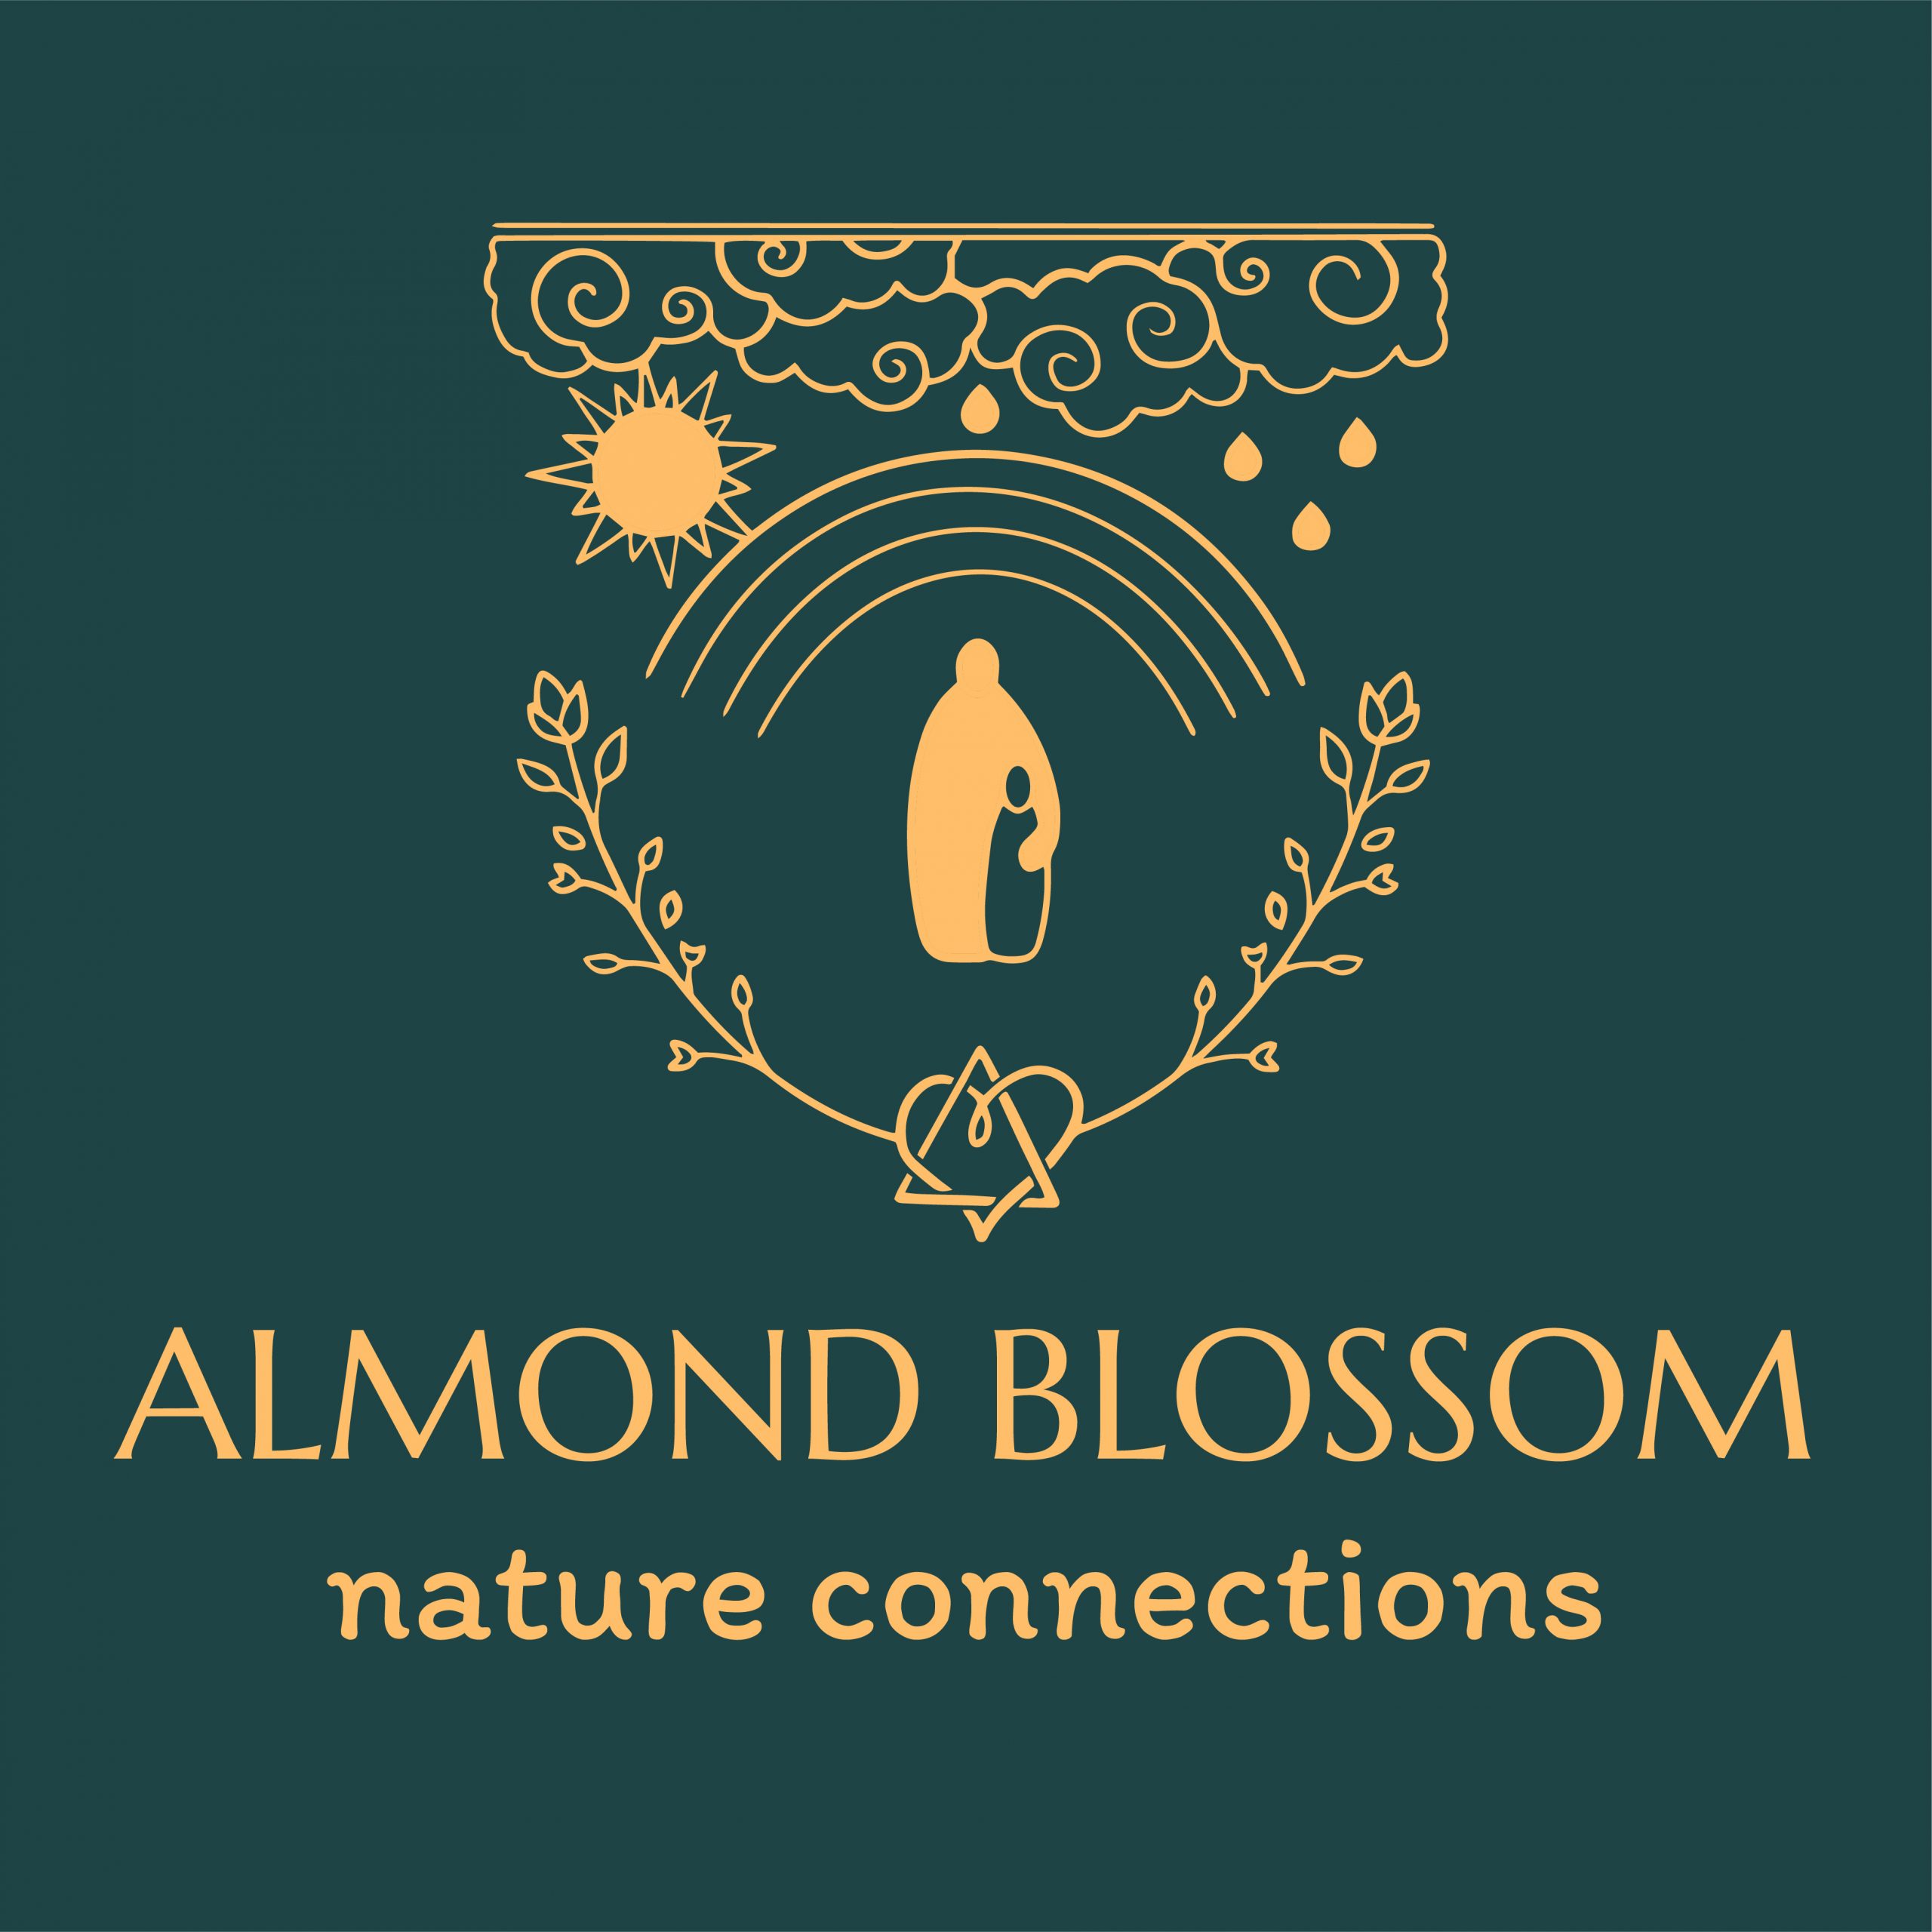 Almond Blossom nature connections